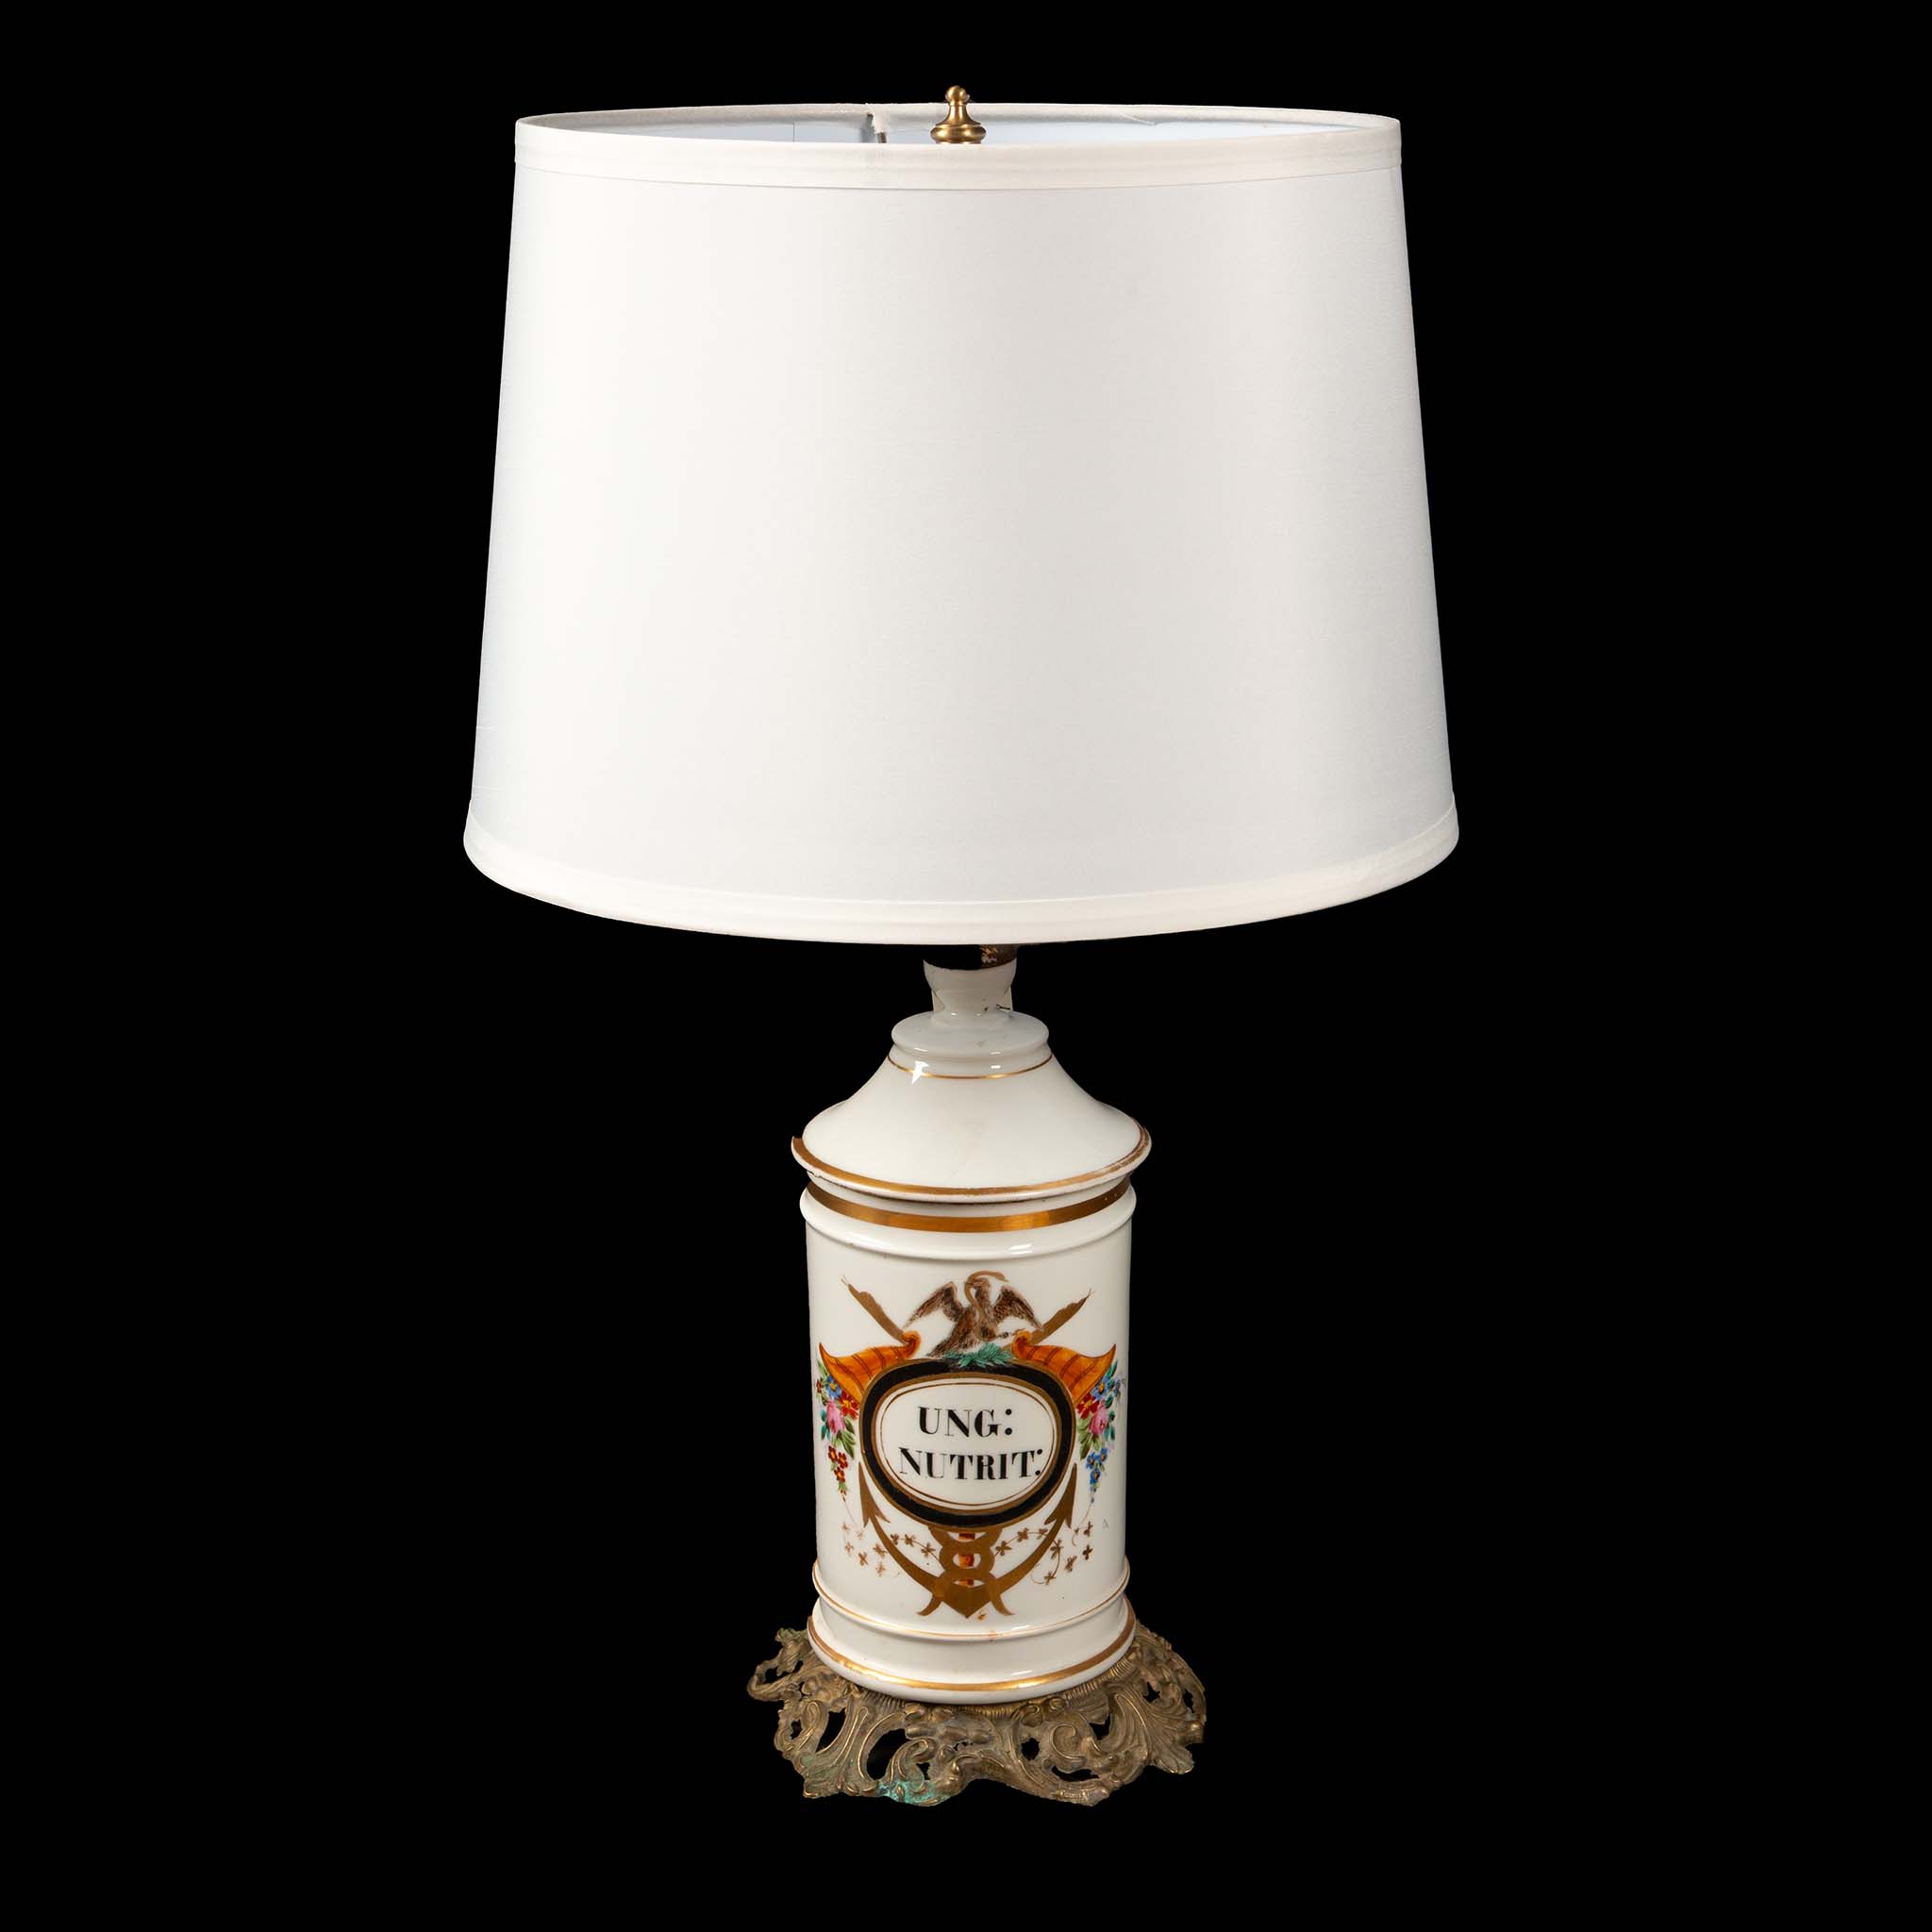 19th C. Apothecary Jar Mounted as a Lamp- 22.5H